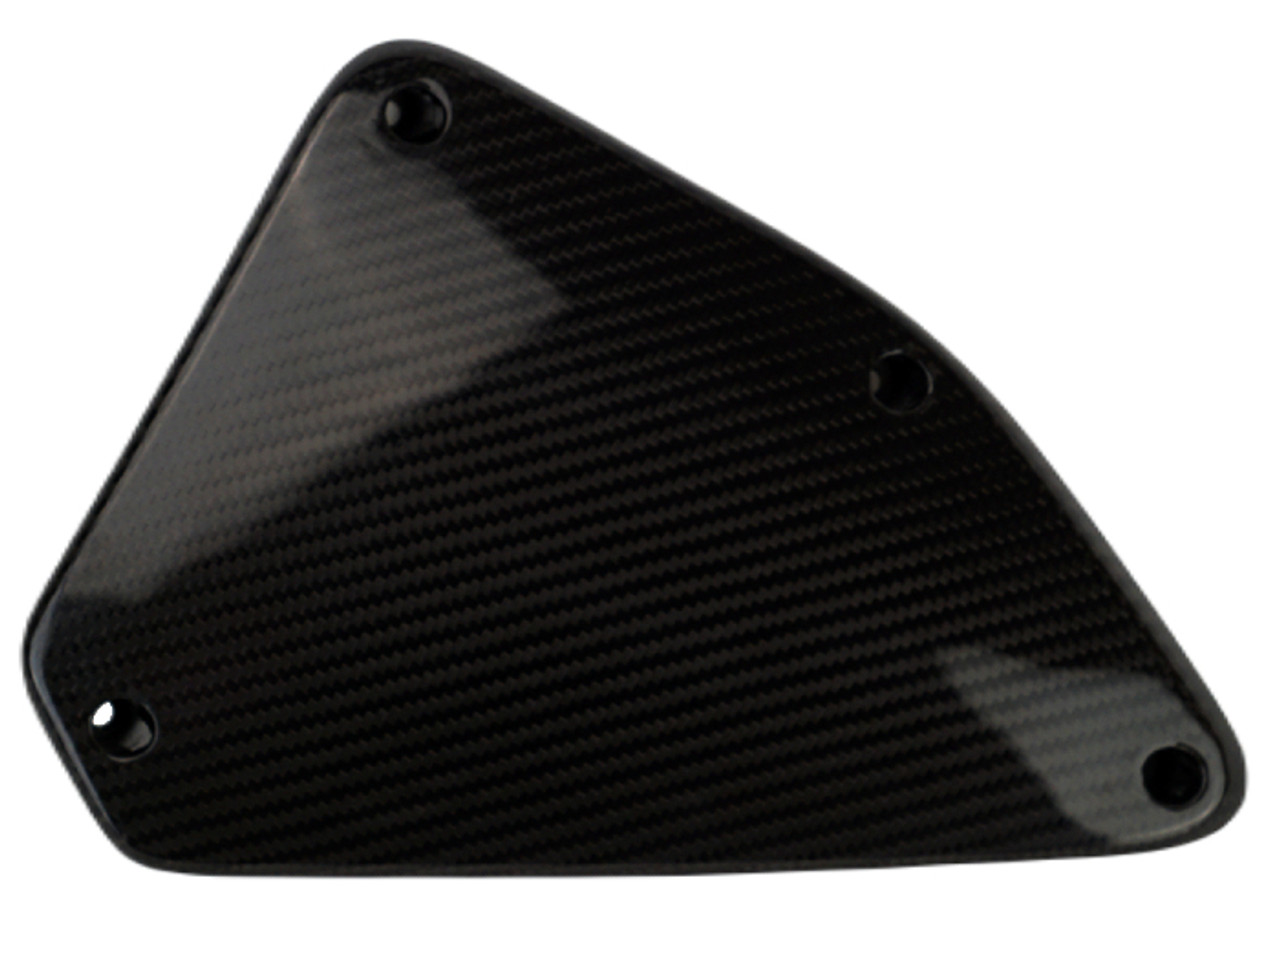 Airbox Cover in Glossy Twill Weave Carbon Fiber for KTM Duke 690 2012-2018